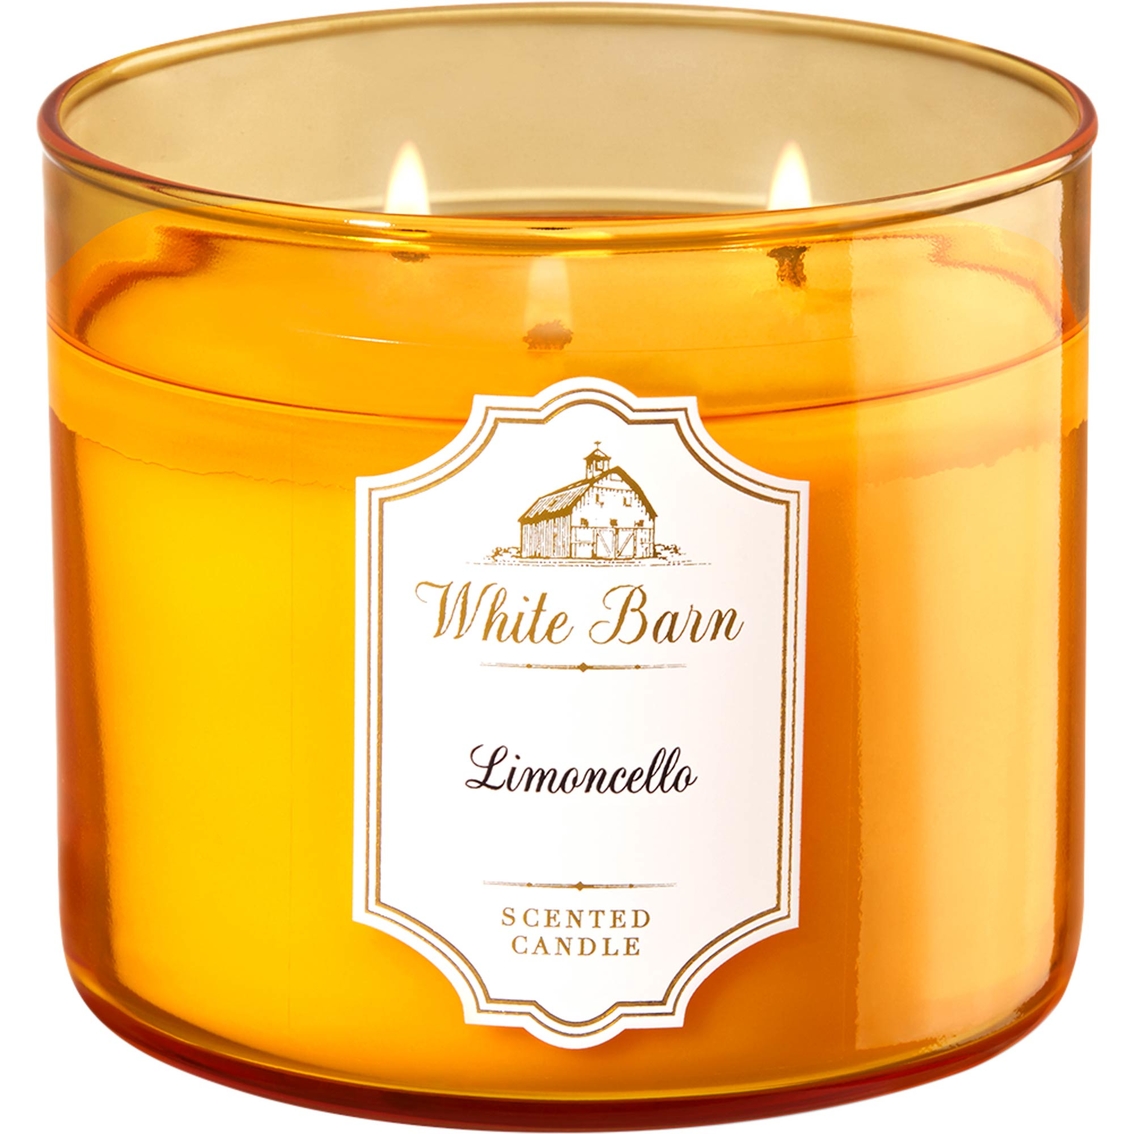 1 Bath & Body Works LIMONCELLO Large 3-Wick Scented Candle 14.5 oz 